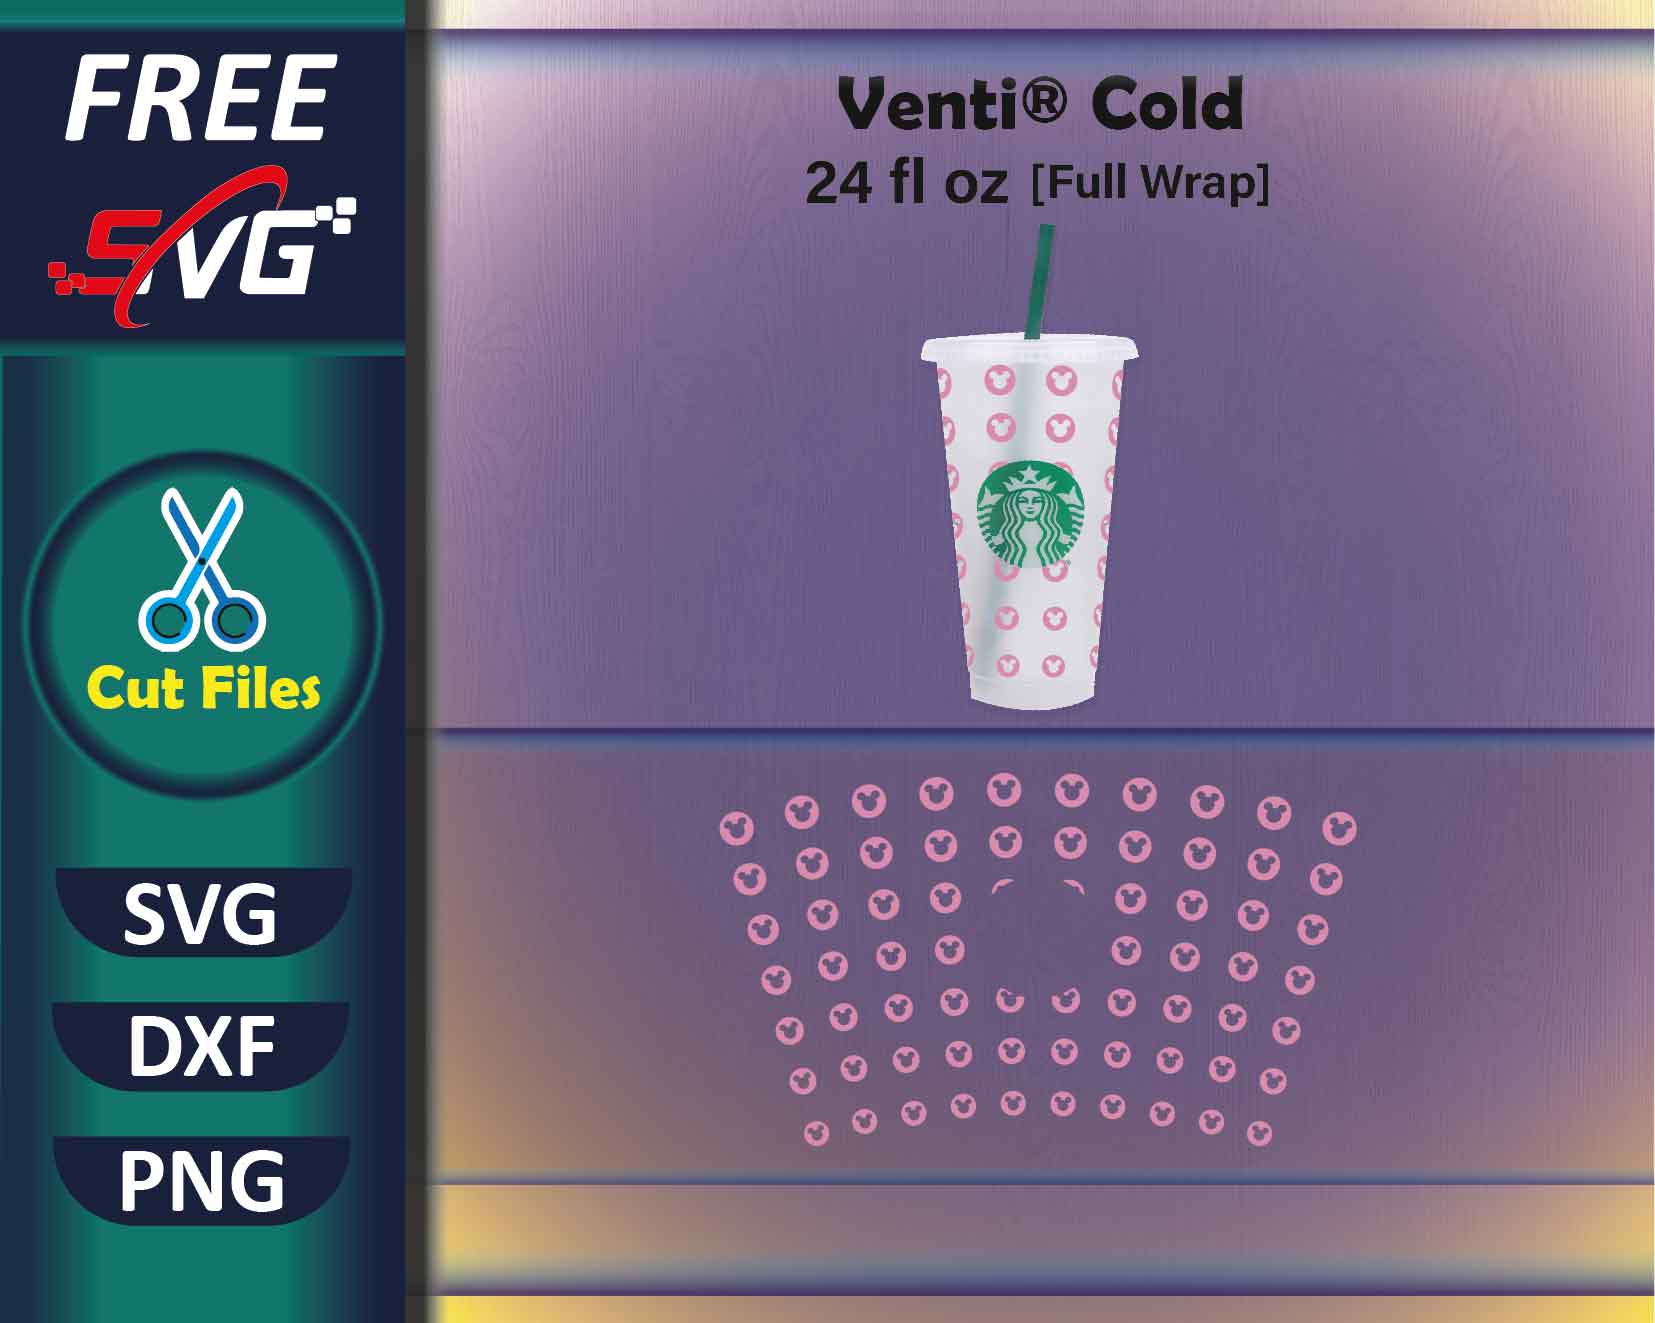 Download +34 Free Starbucks Wrap SVG For Cricut or Silhouette – 8SVG